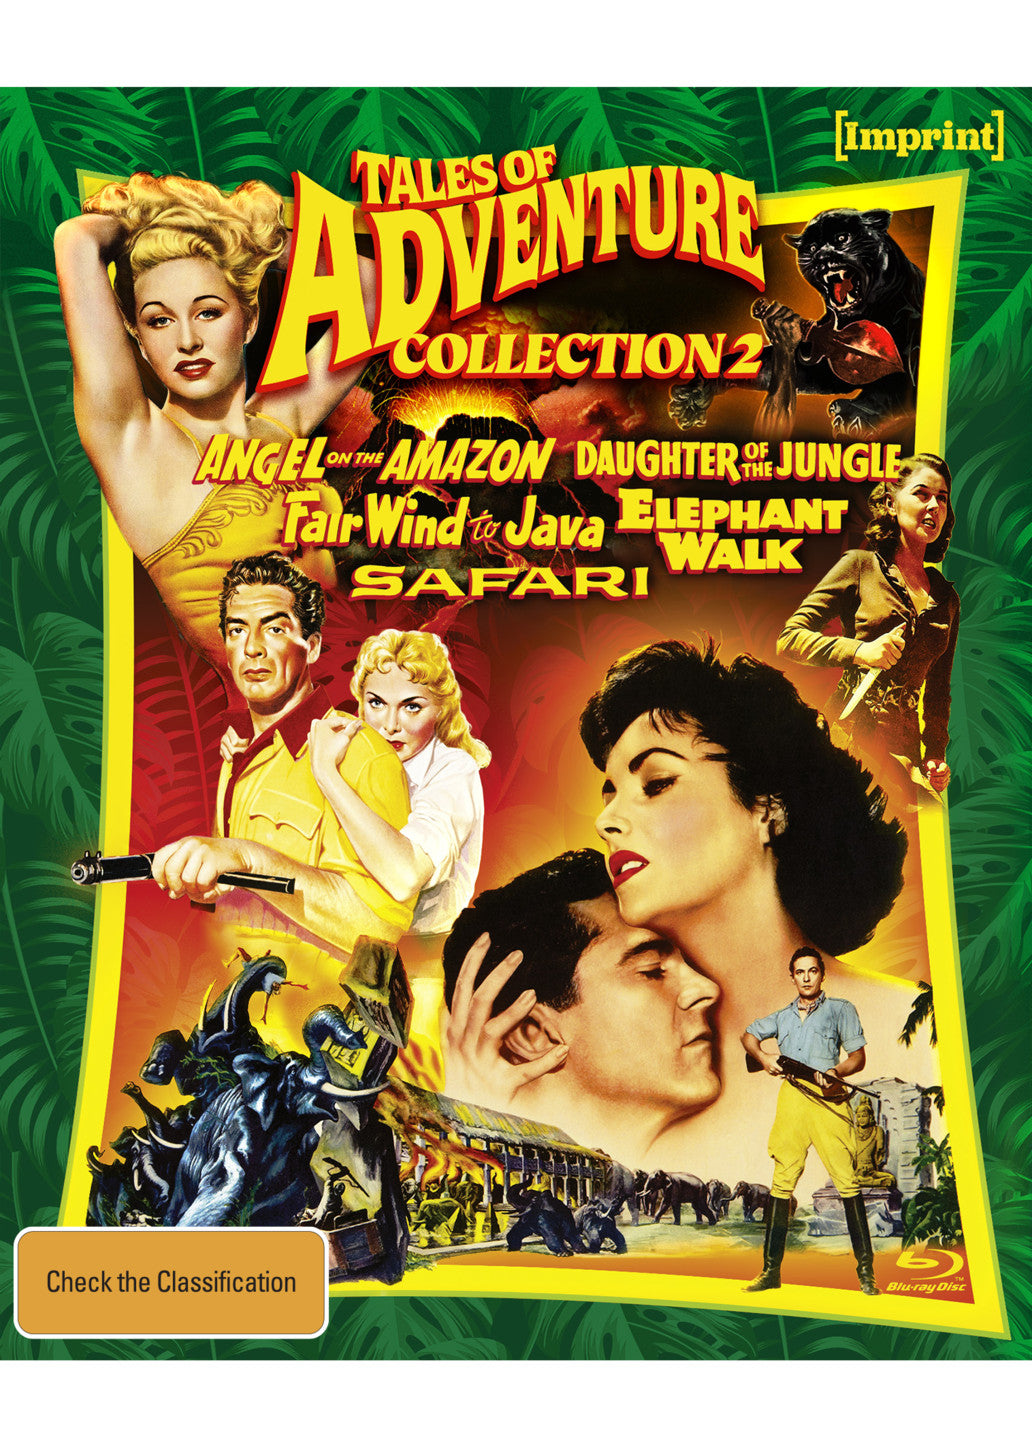 TALES OF ADVENTURE: COLLECTION 2 (IMPRINT COLLECTION #266-269)